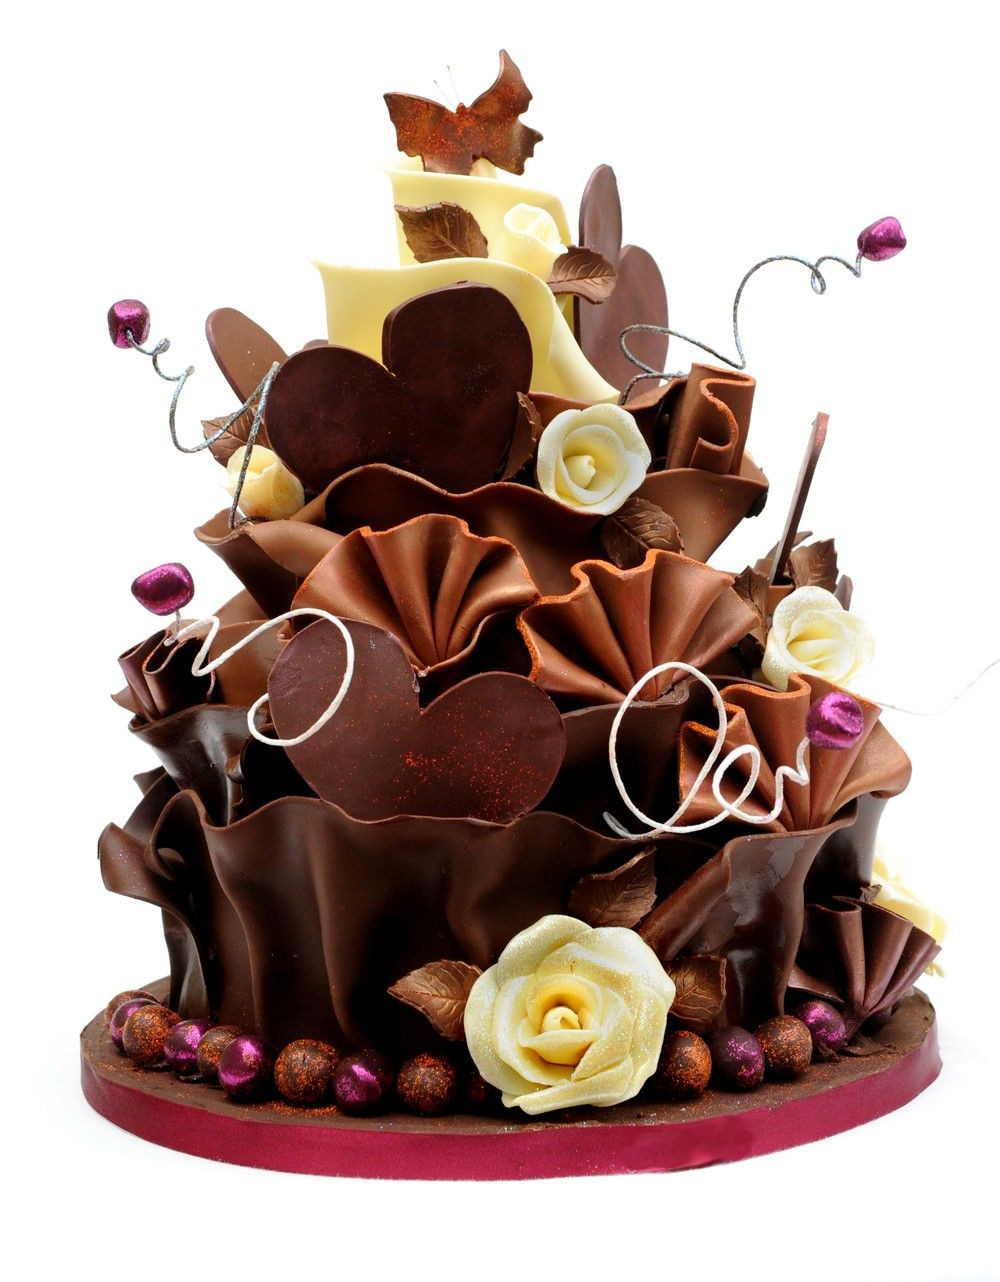 Beautiful Birthday Cake Images
 Most Beautiful Chocolate Birthday Cakes Ever Most